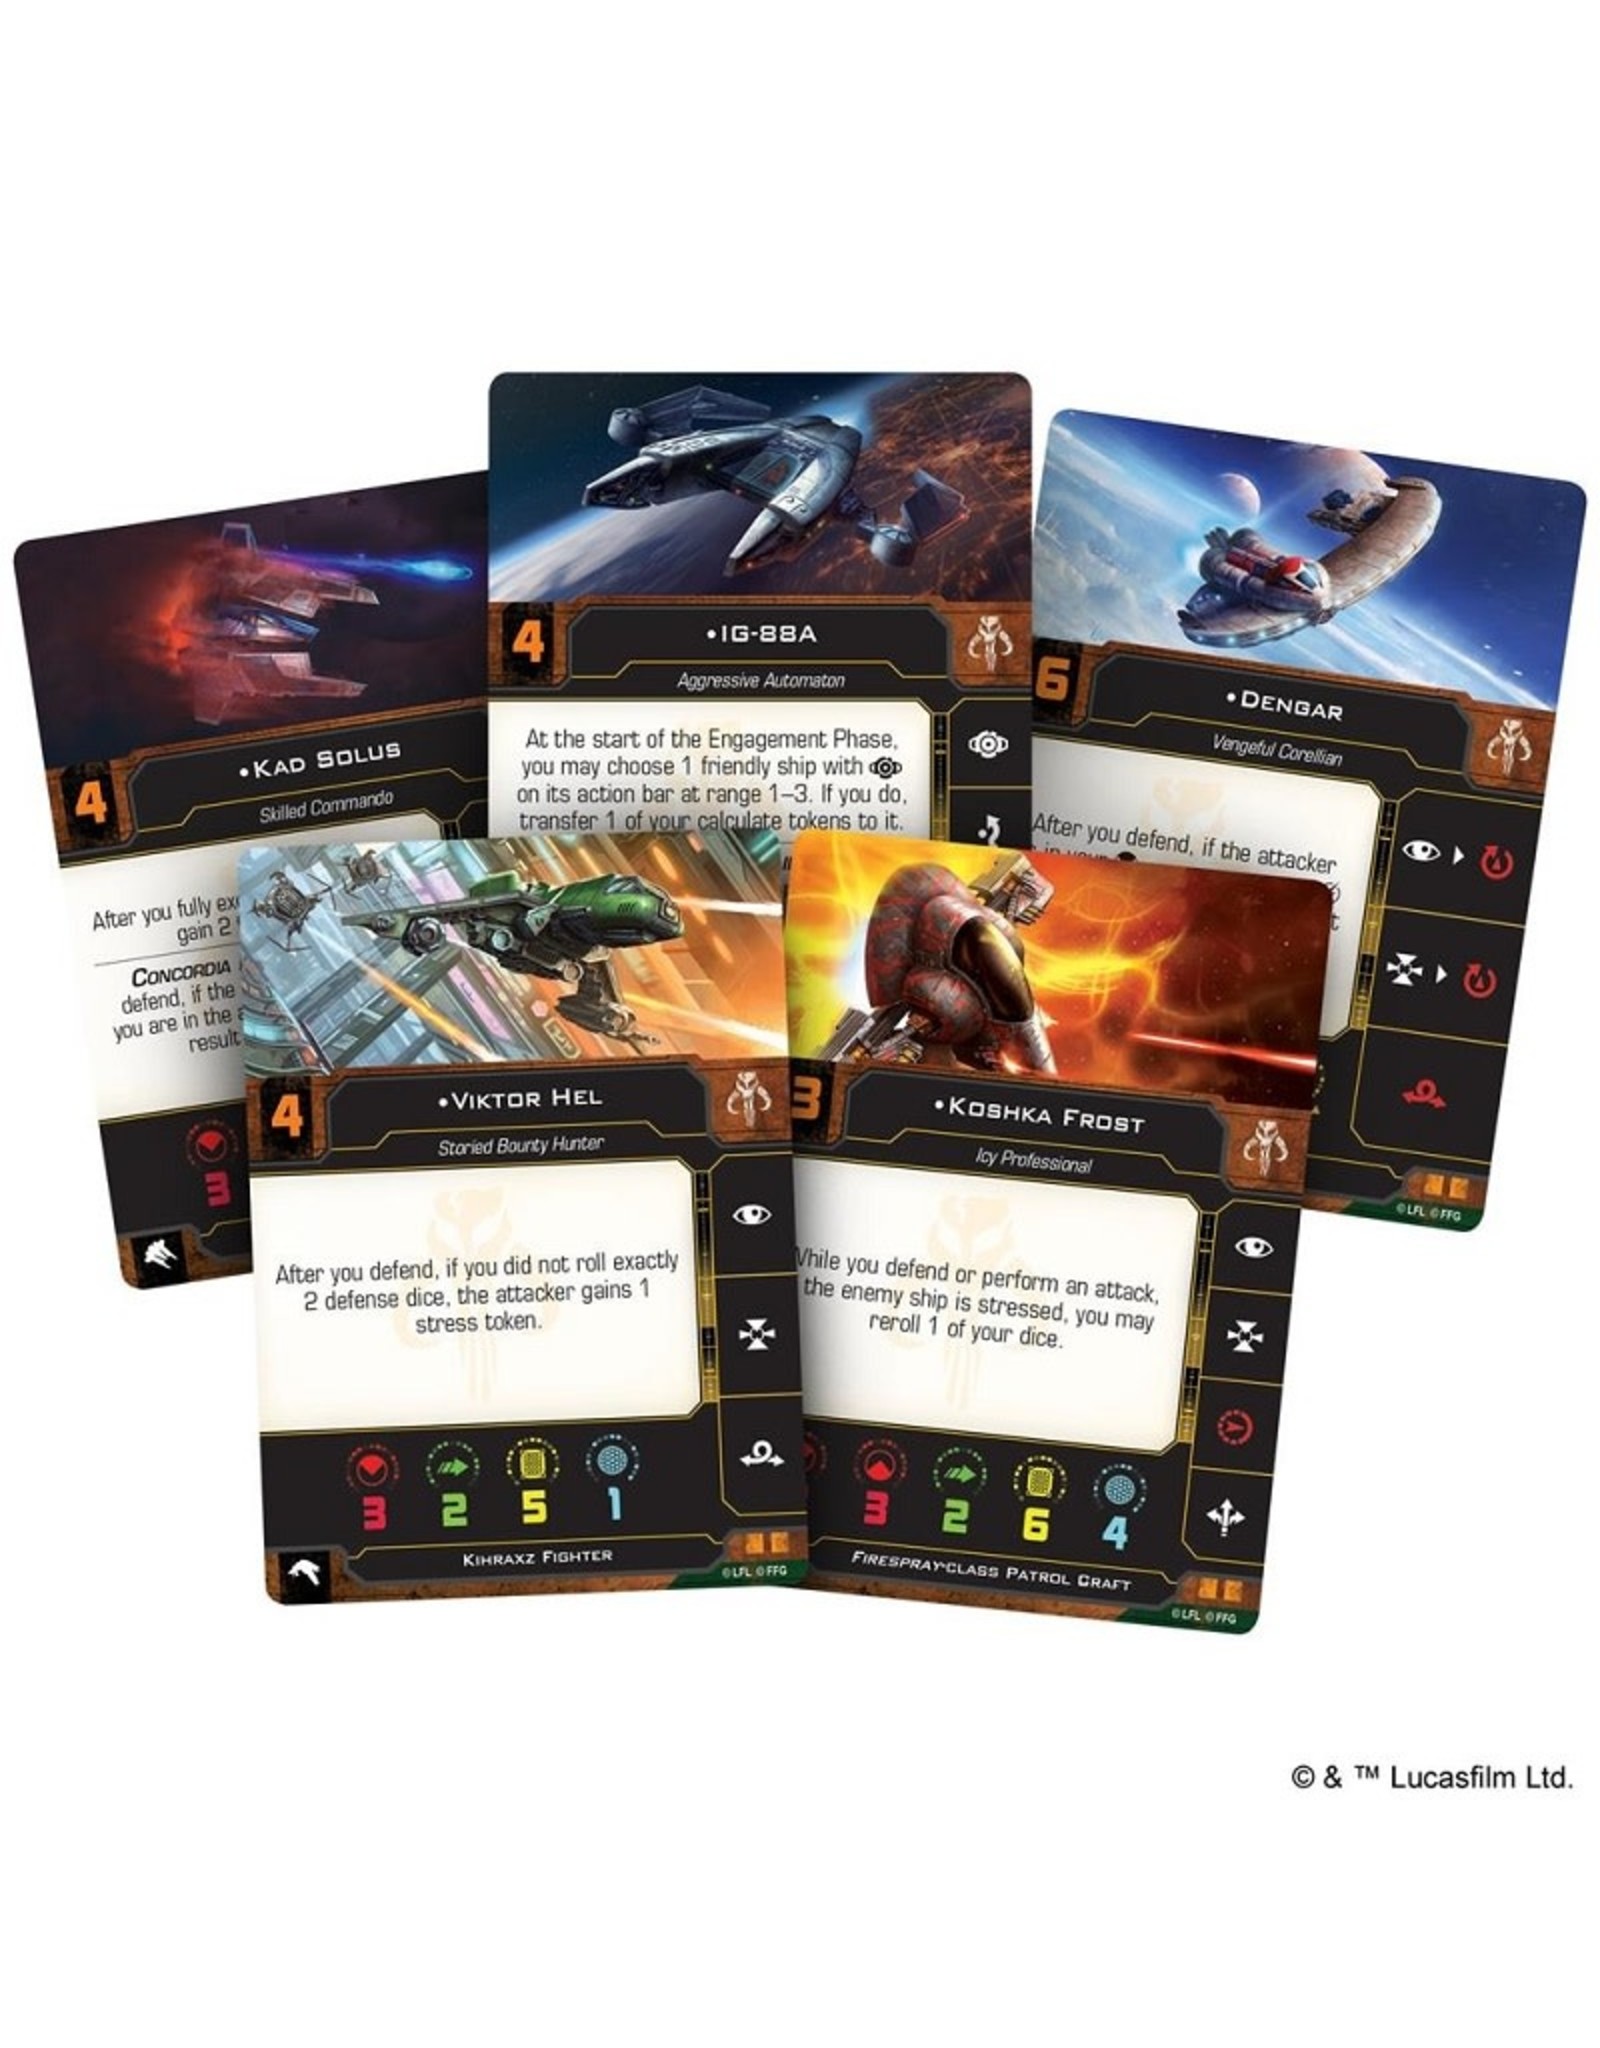 Atomic Mass Games Star Wars X-Wing: Scum and Villainy Conversion Kit - 2nd Edition